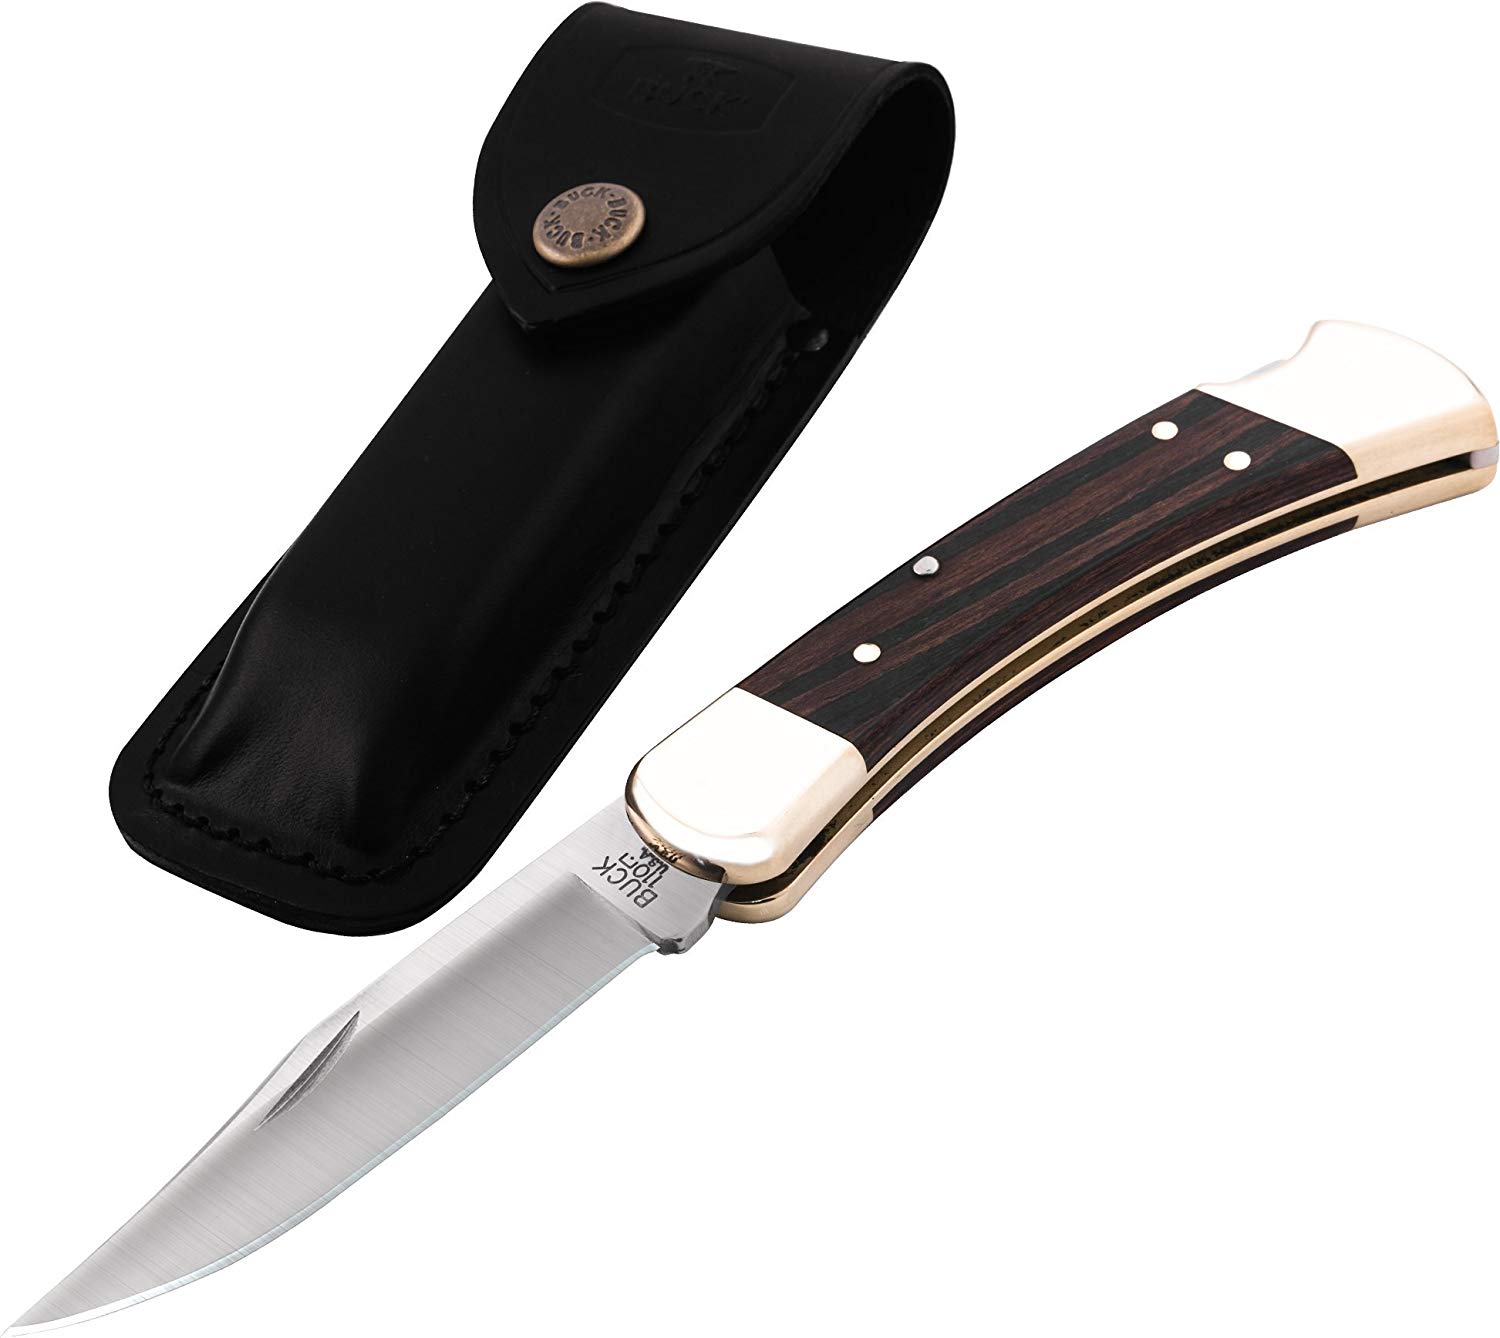 Depending on your point of acquisition, it may come with a belt-loop leather sheath with snap-closure.